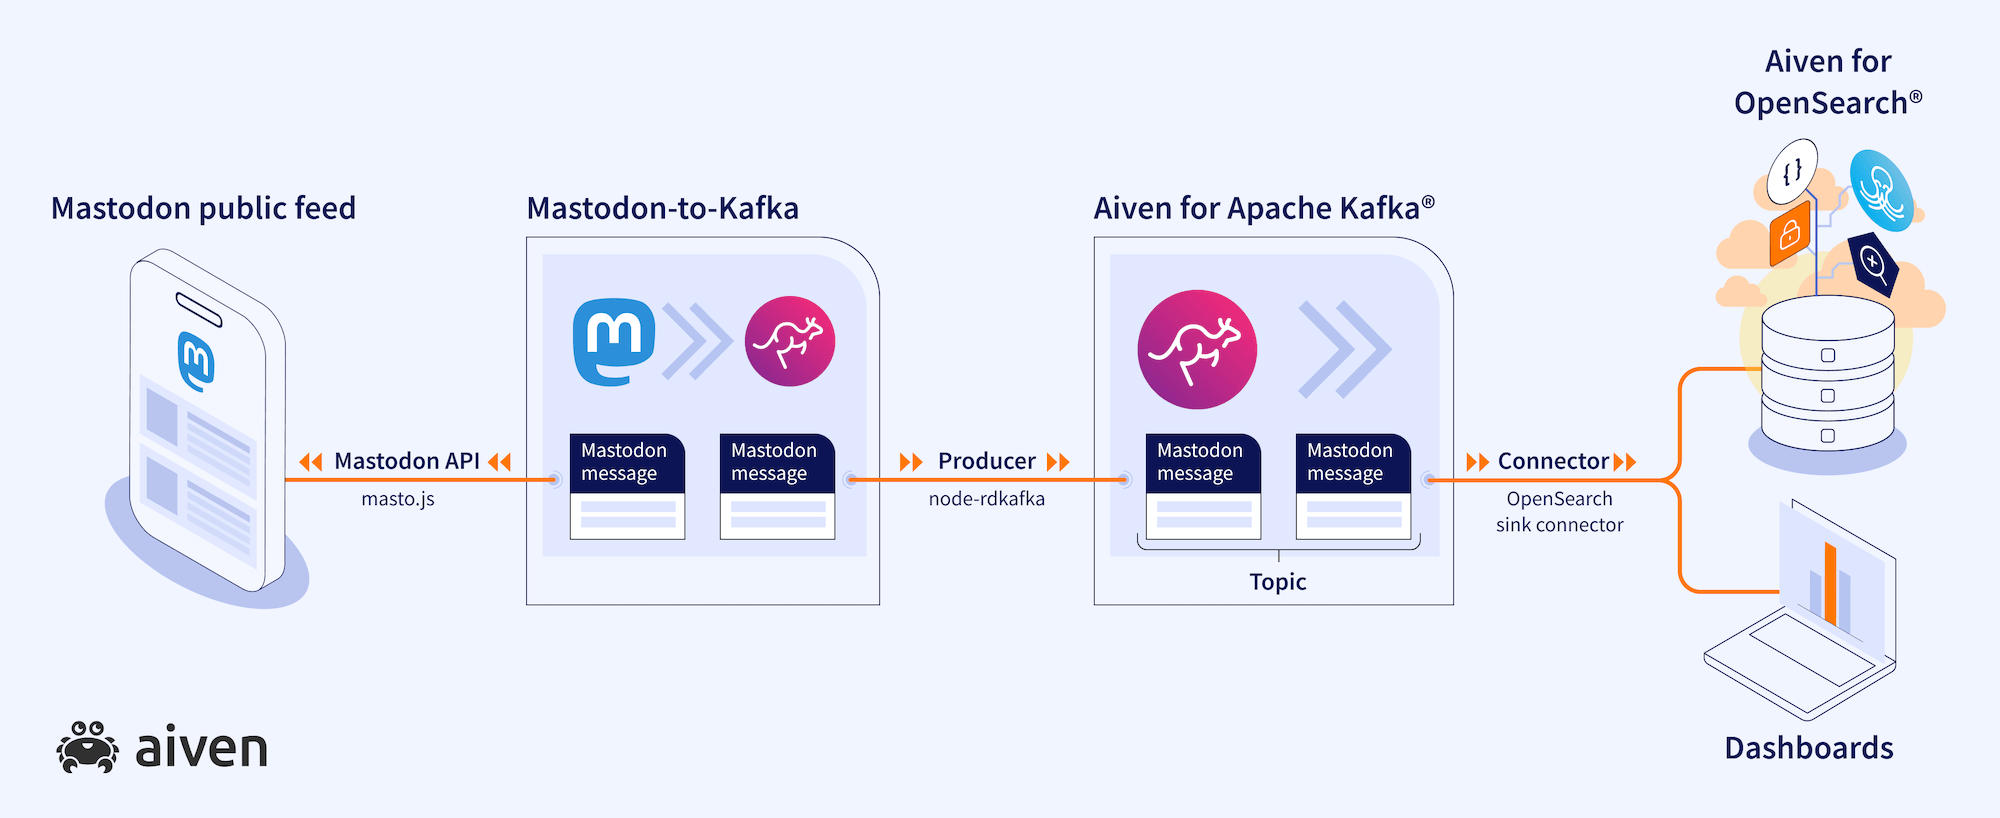 A diagram that visualises two steps of data transport. The first step (described in detail in the previous article) is bringing data from a Mastodon public feed into an Apache Kafka topic using the Mastodon API, masto.js and node-rdkafka. The second step (described in this article) is using an OpenSearch sink connector into OpenSearch.